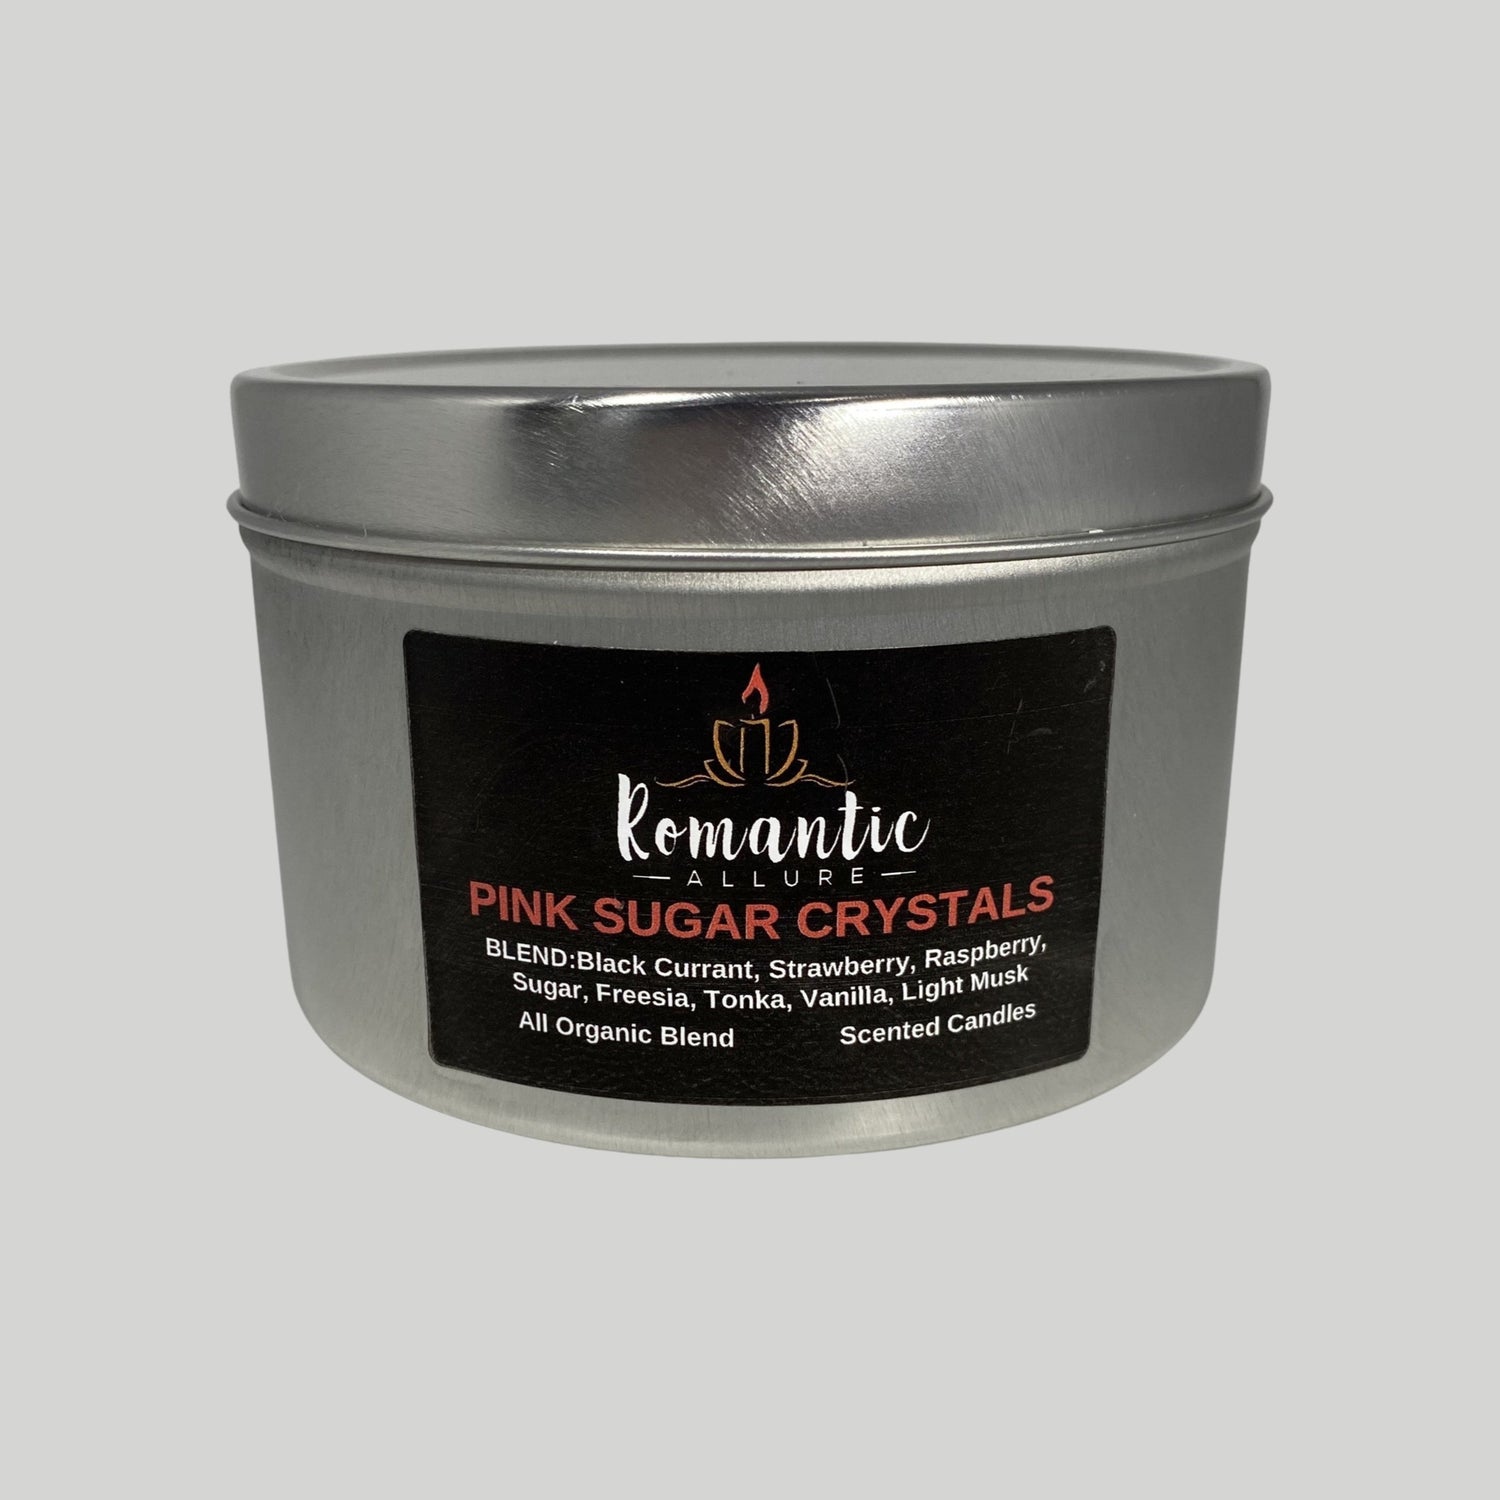 Pink Sugar Crystals Tin Candle - Romantic Allure Candle Company